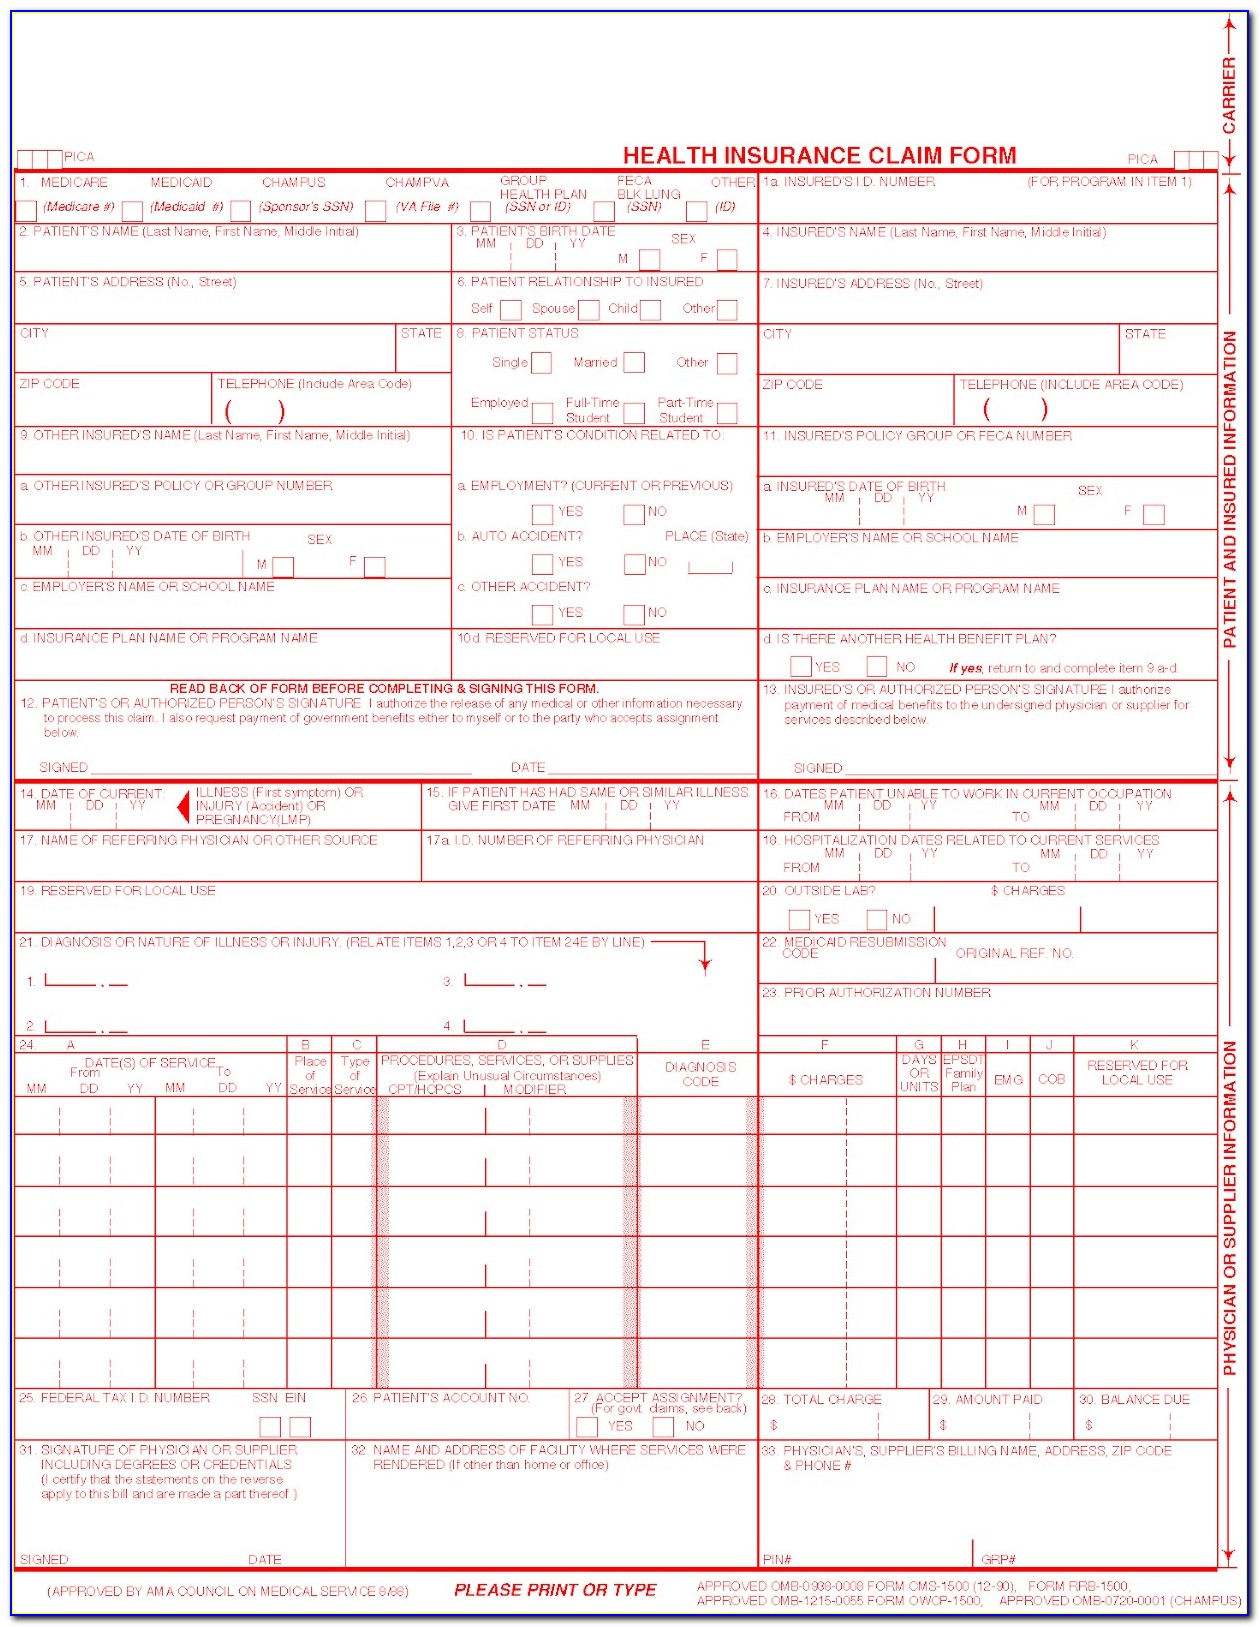 Hcfa 1500 Forms Free Download